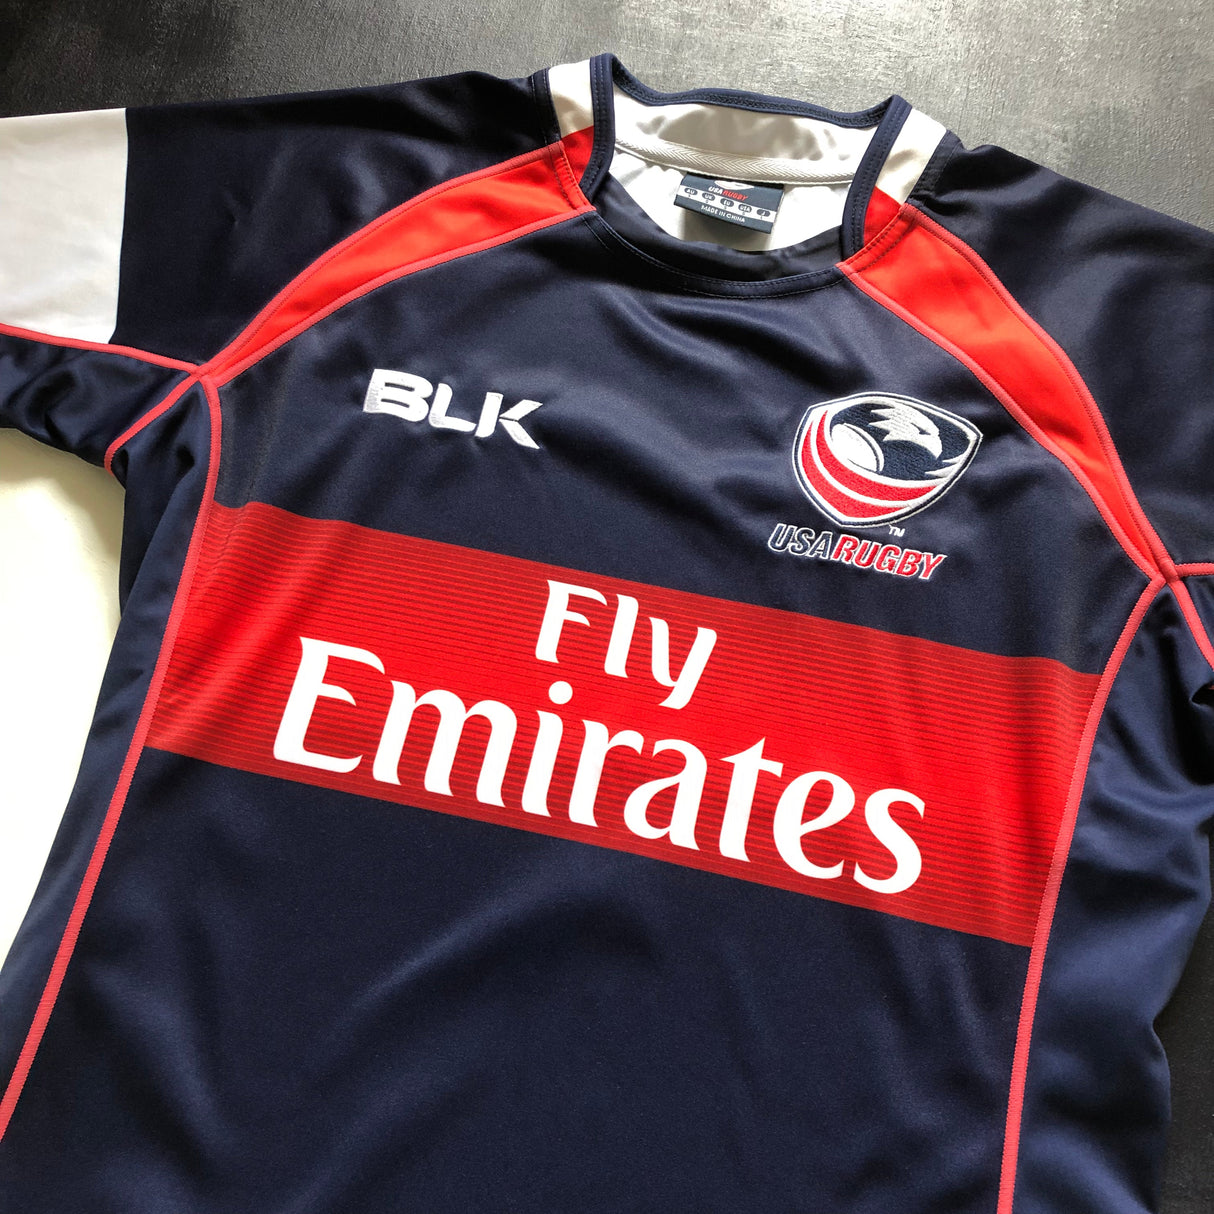 USA National Rugby Team Jersey 2014/15 Small Underdog Rugby - The Tier 2 Rugby Shop 